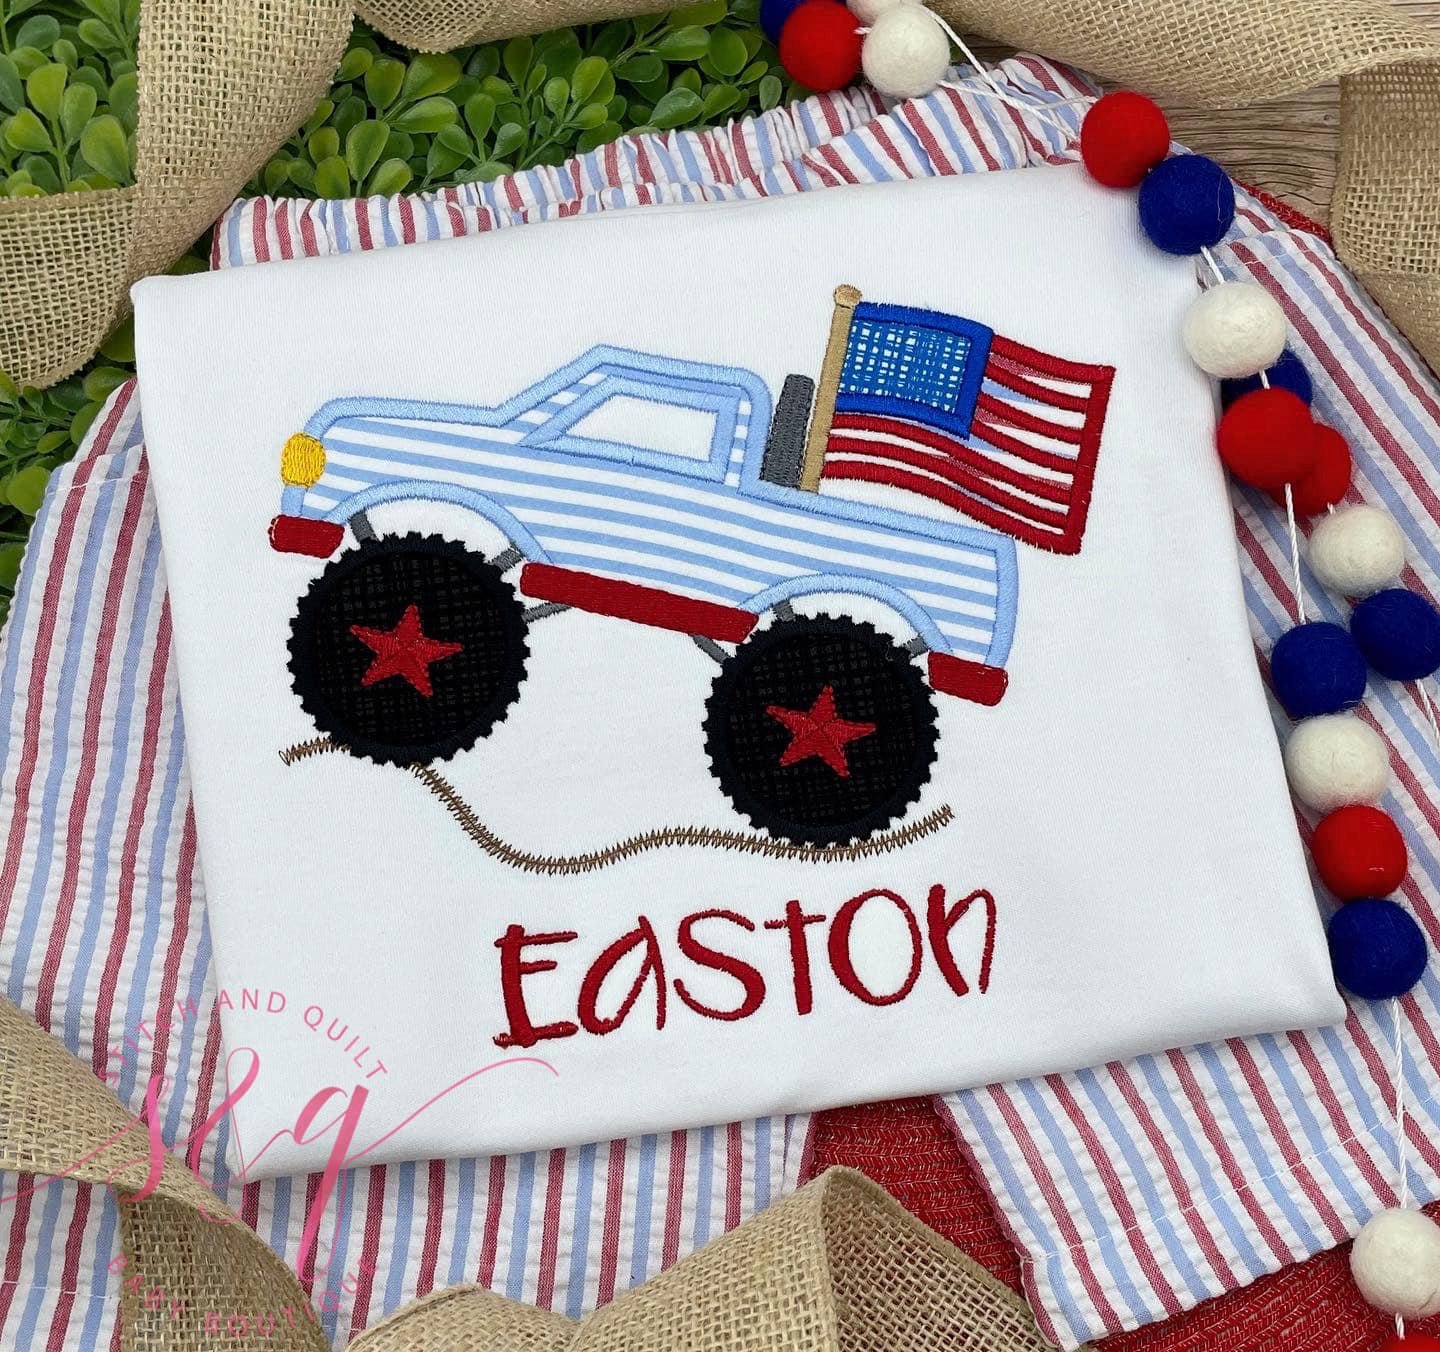 Make Your Little Boy's 4th of July Even More Special with Personalized Monster Truck for 4th of July